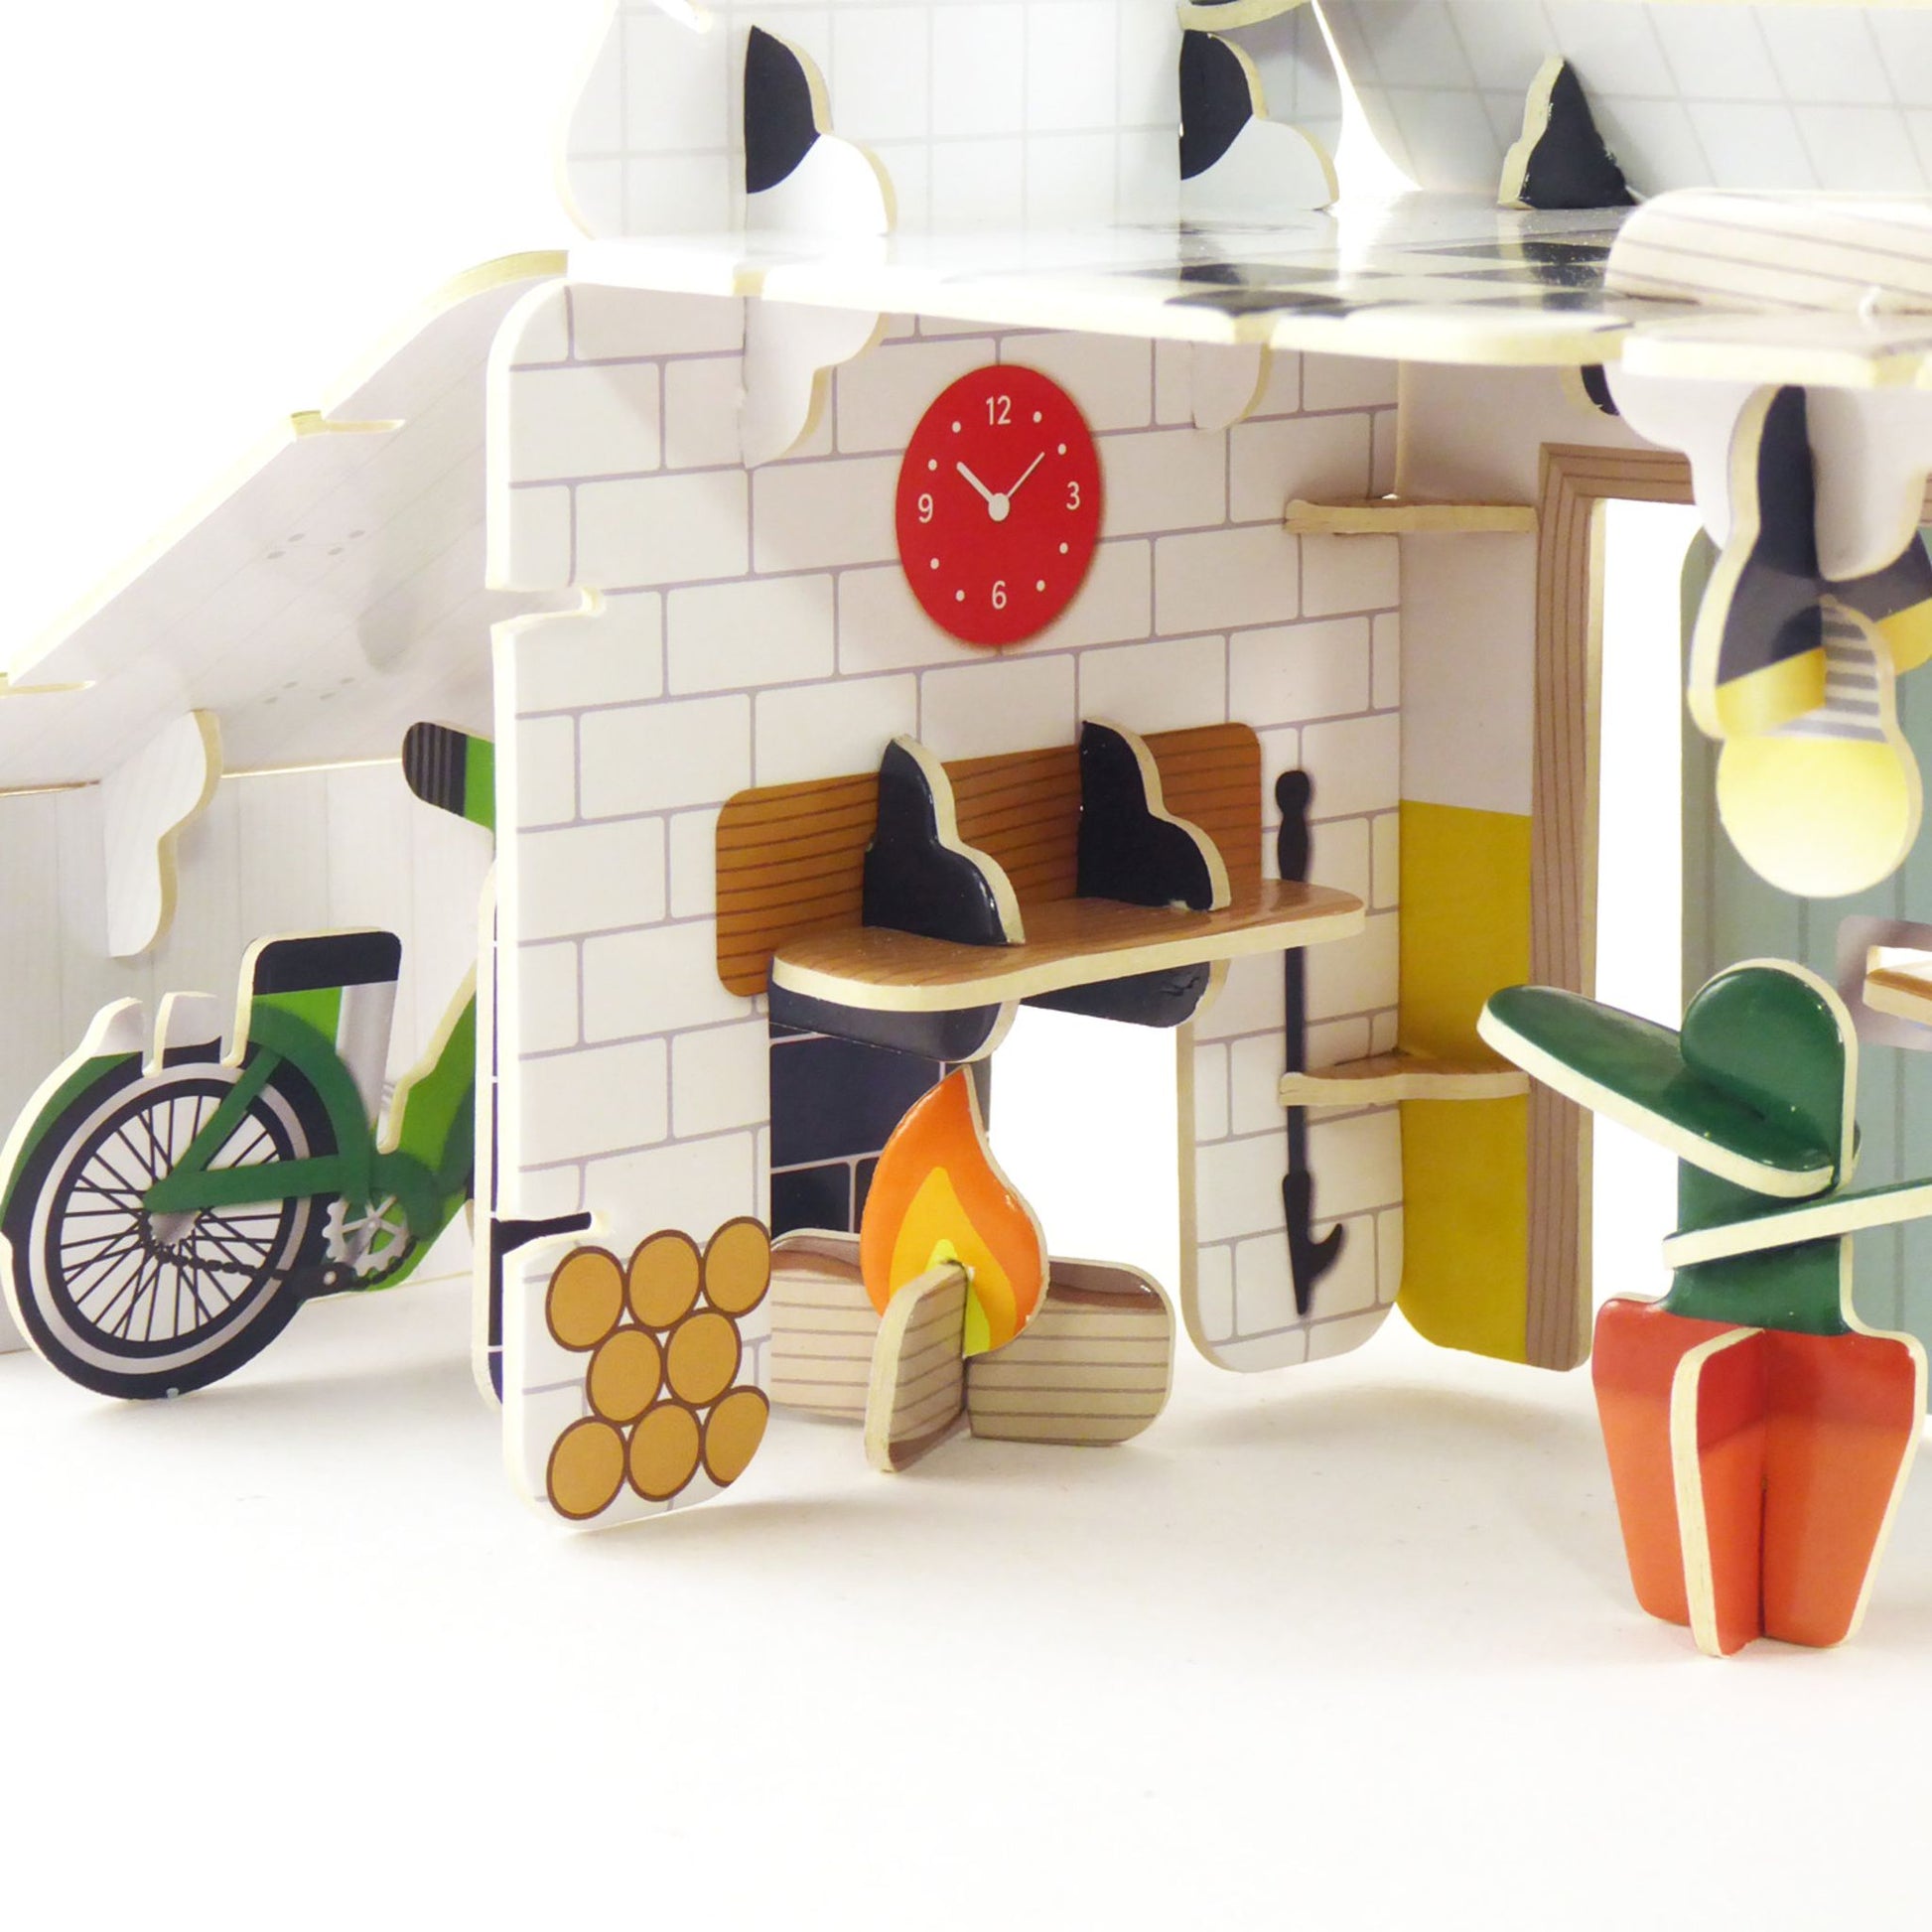 Build and Play Eco House Play Set - fireplace